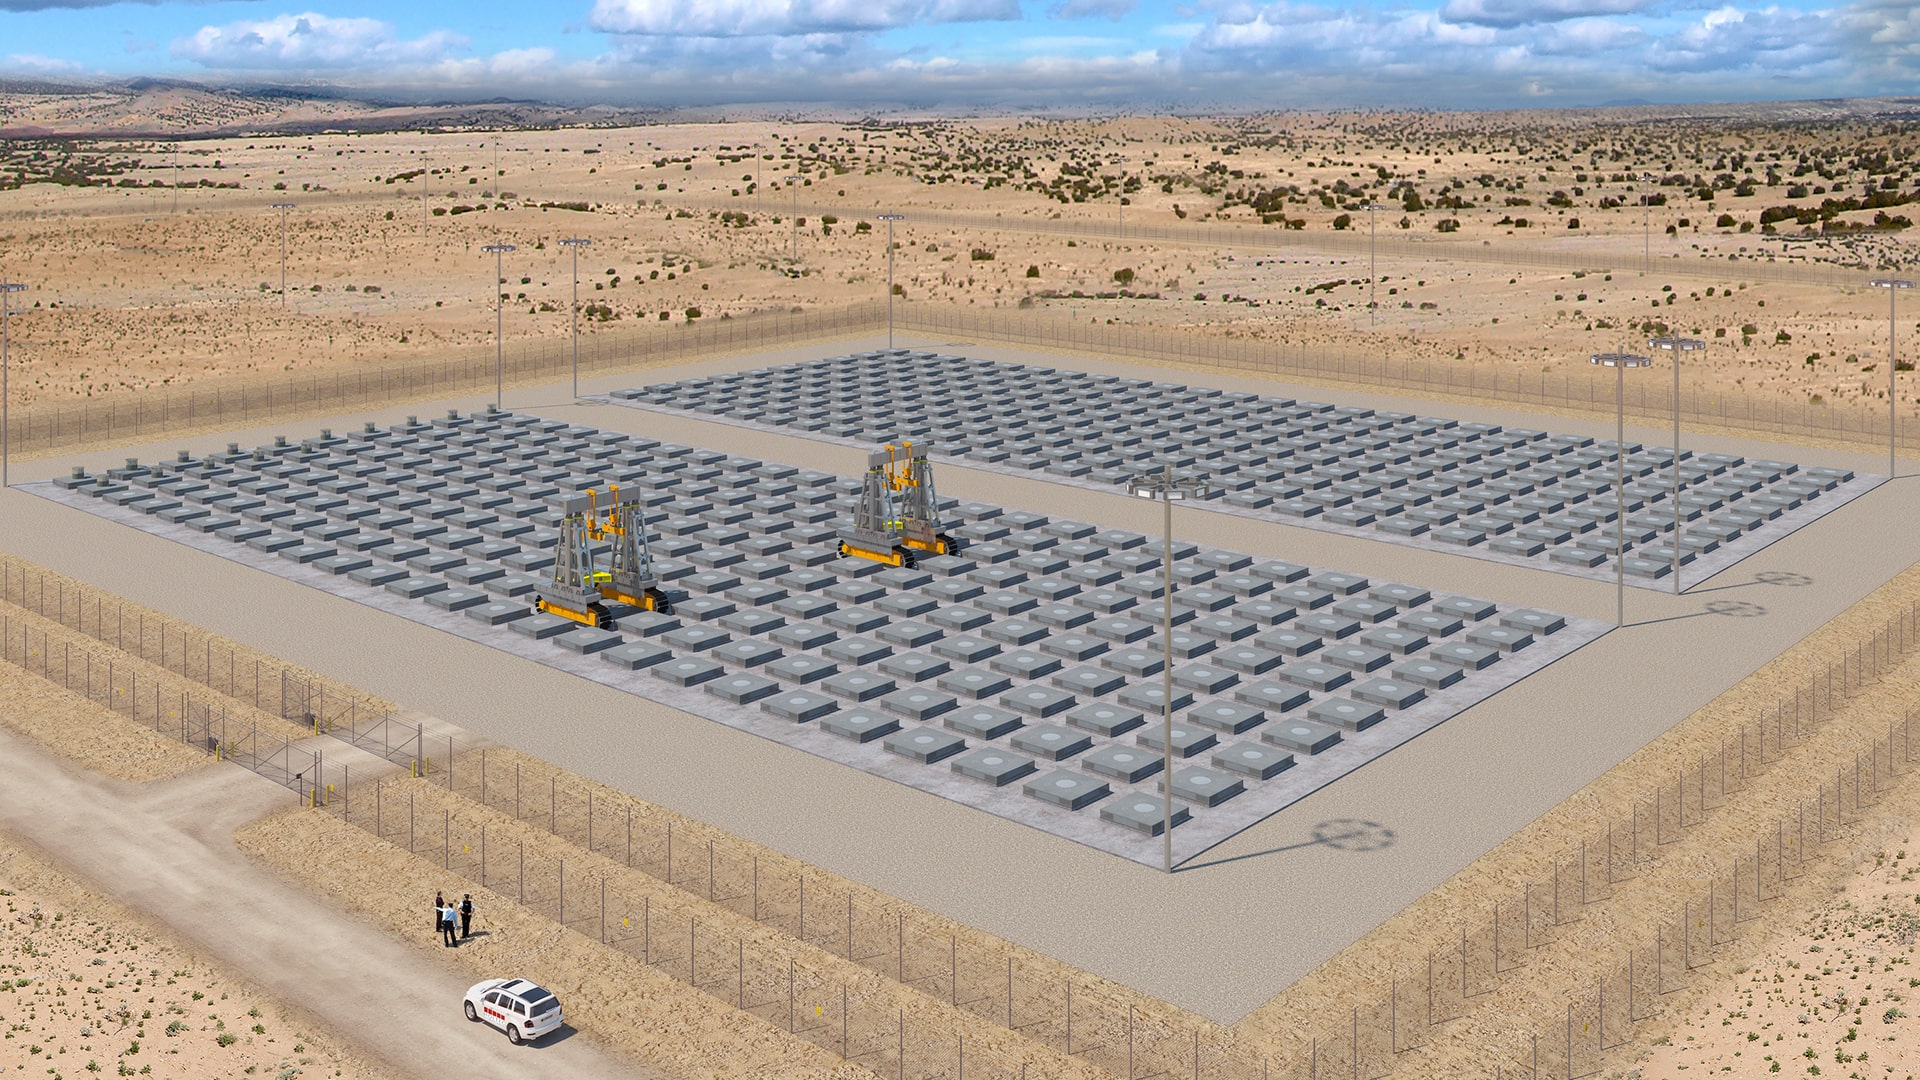 Photo rendering of the proposed Holtec consolidated interim storage facility courtesy of Holtec International.